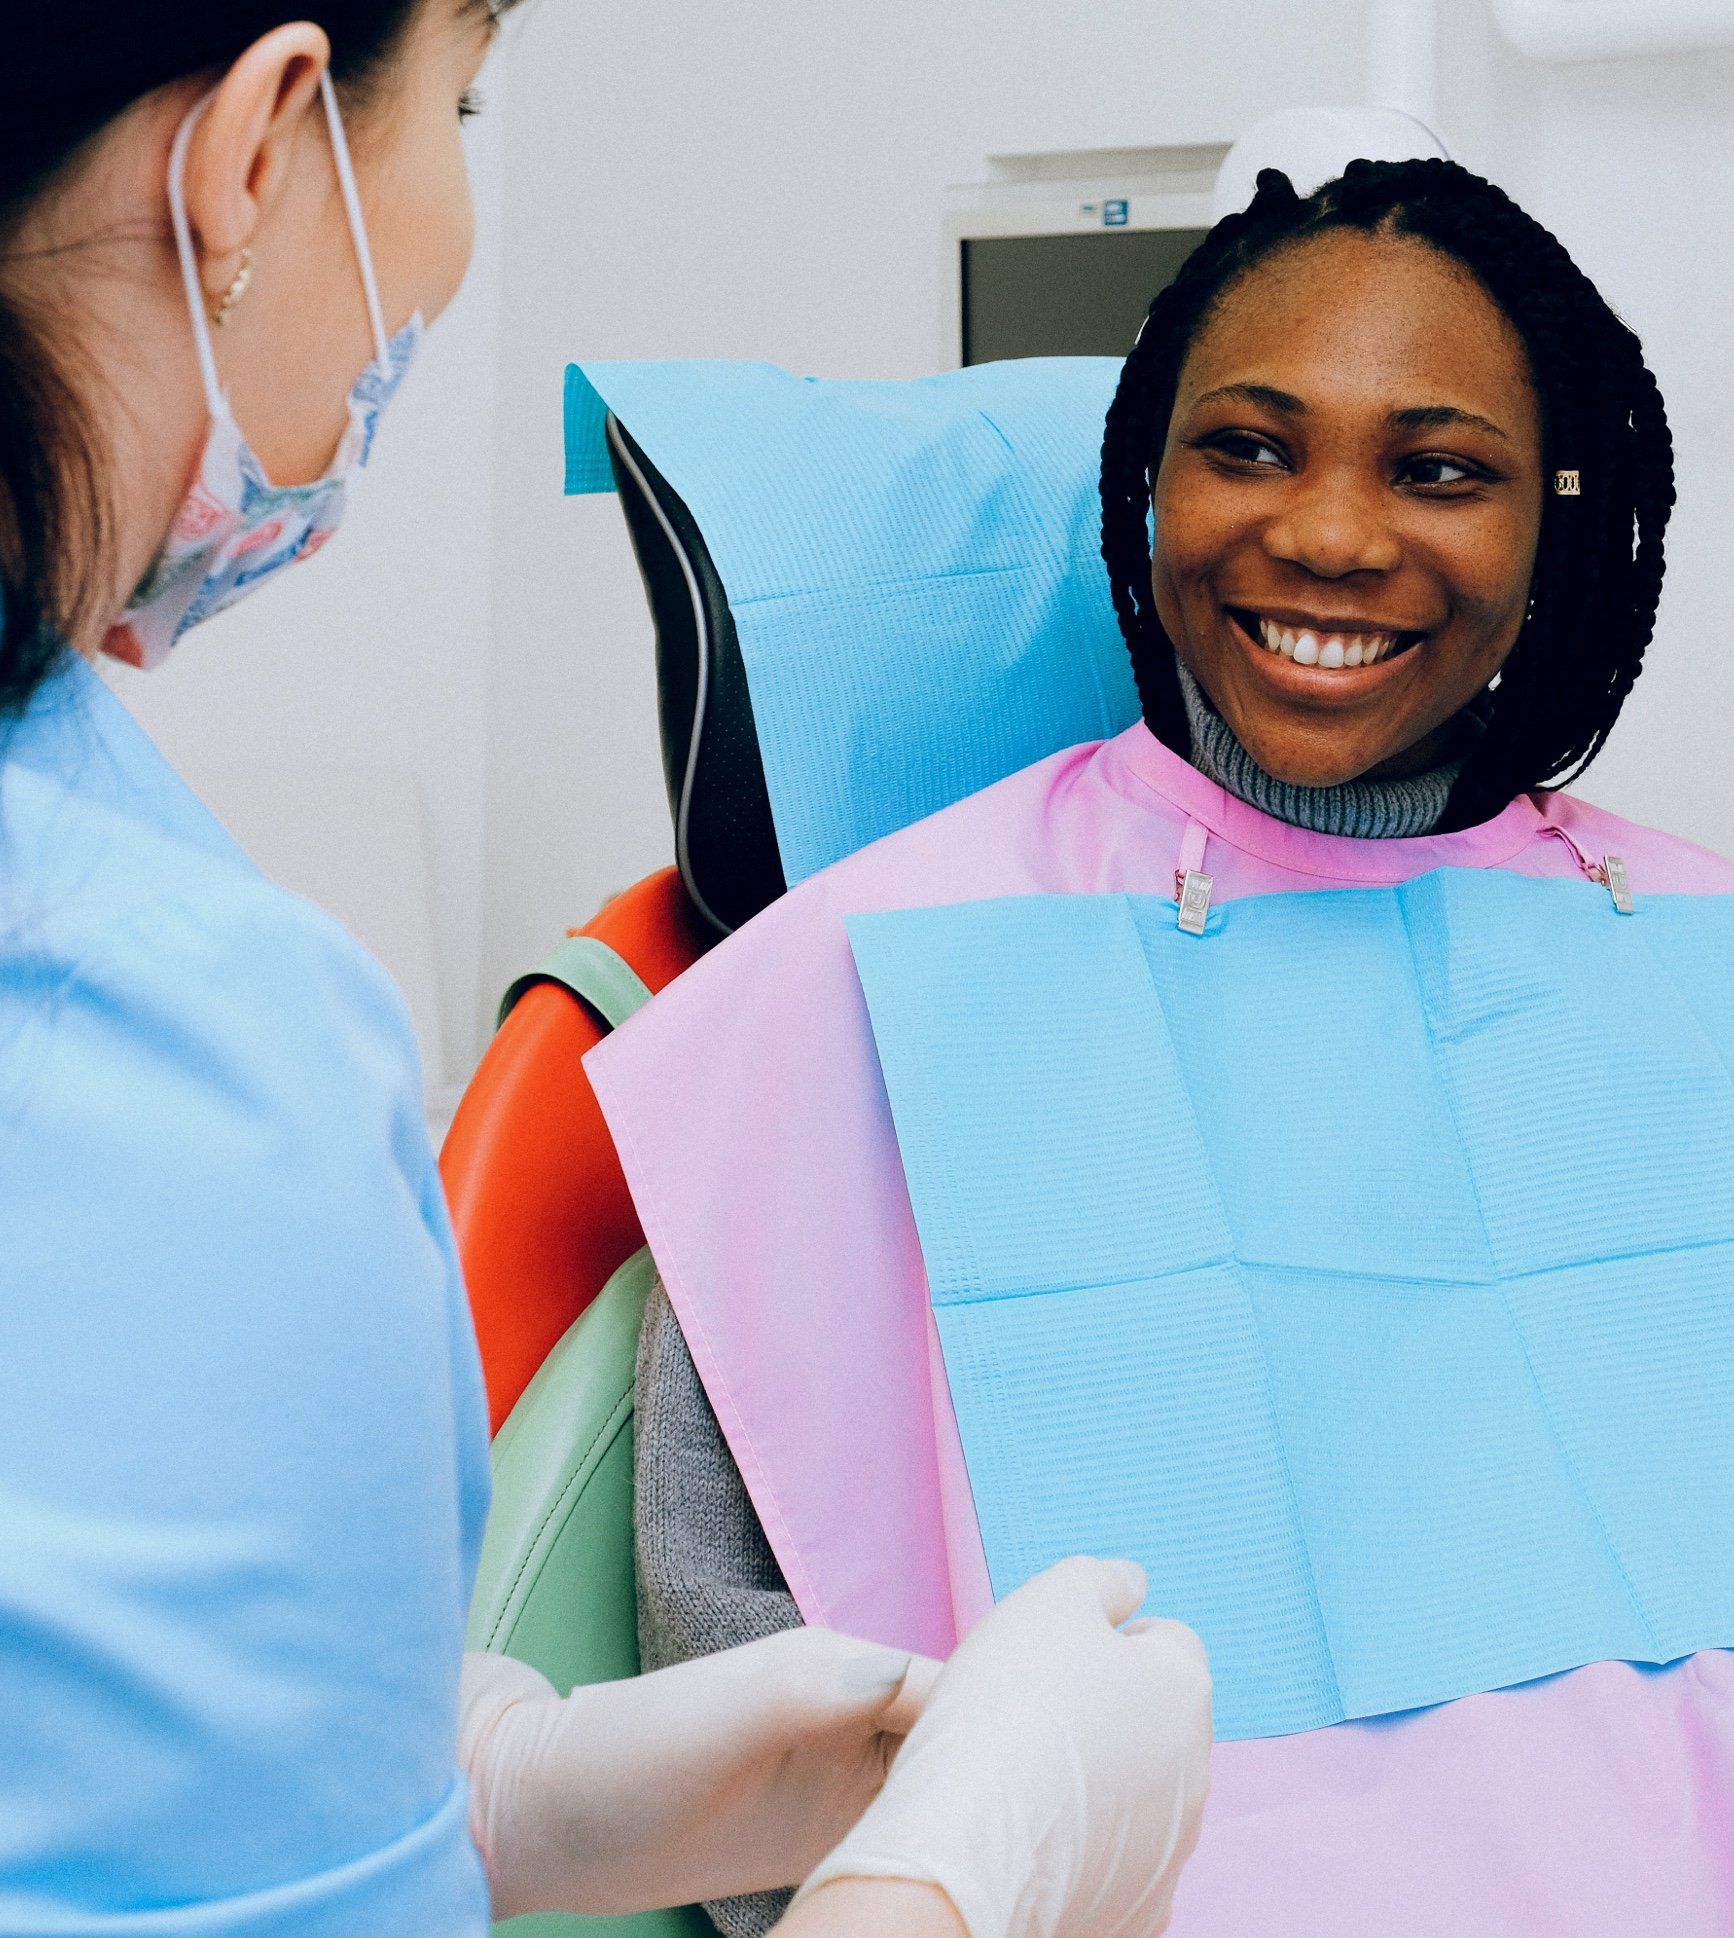 A Woman is sitting in a Dental Chair and smiling at the dentist